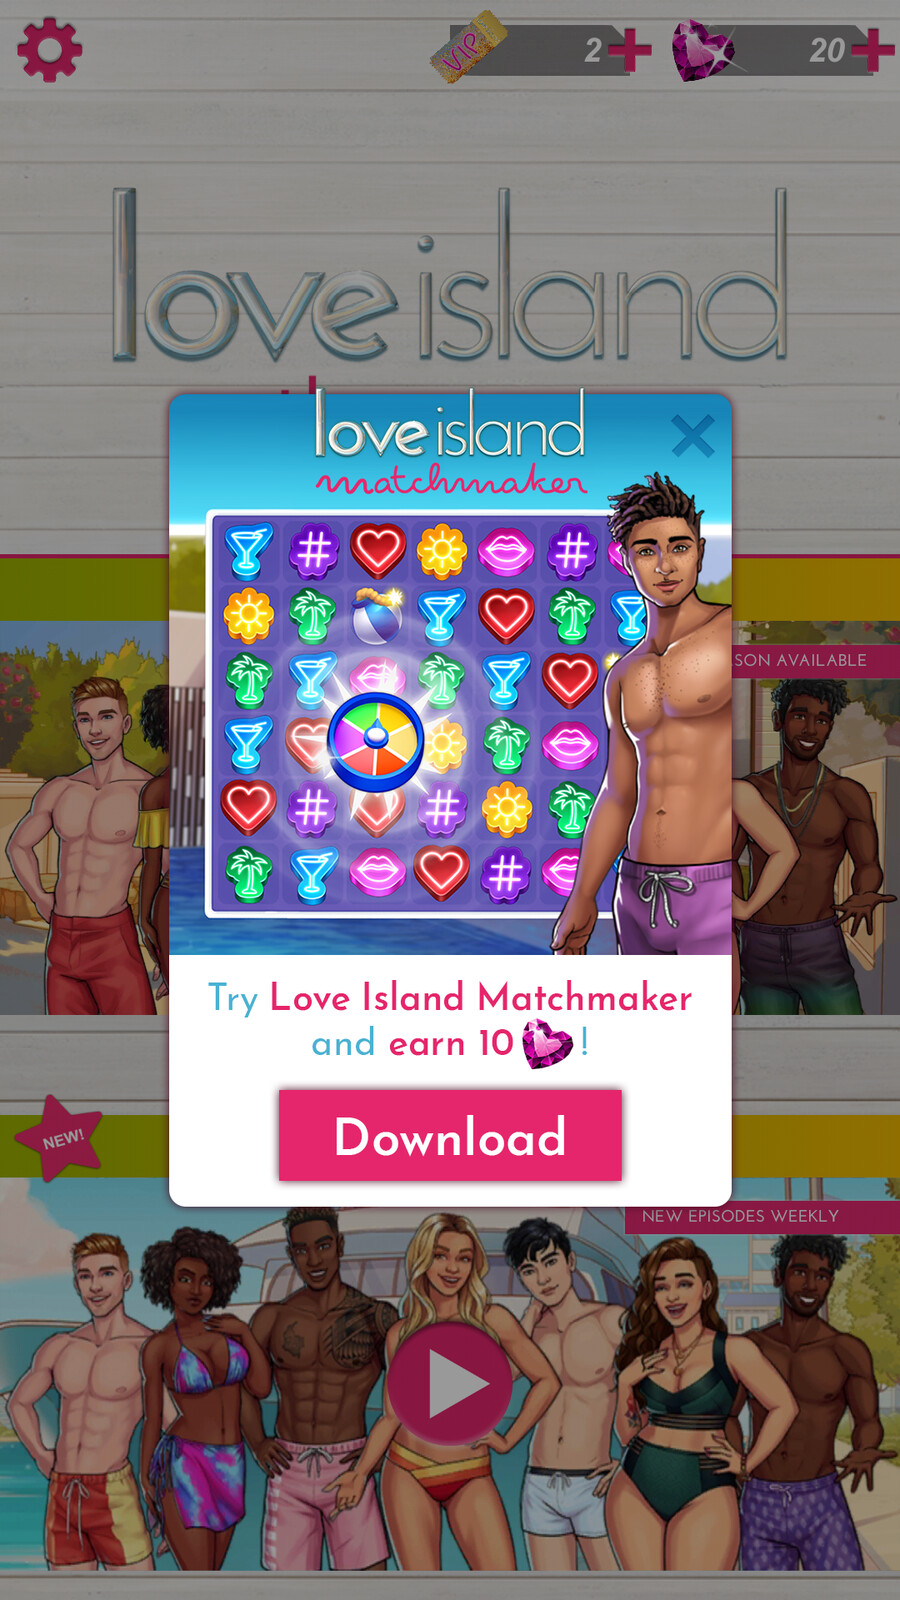 Bonus: CRM/Promotional pop-up for a new Love Island game; the first task I accomplished after joining the company. It allowed me to study the current game style and find ways to work within its limitations.